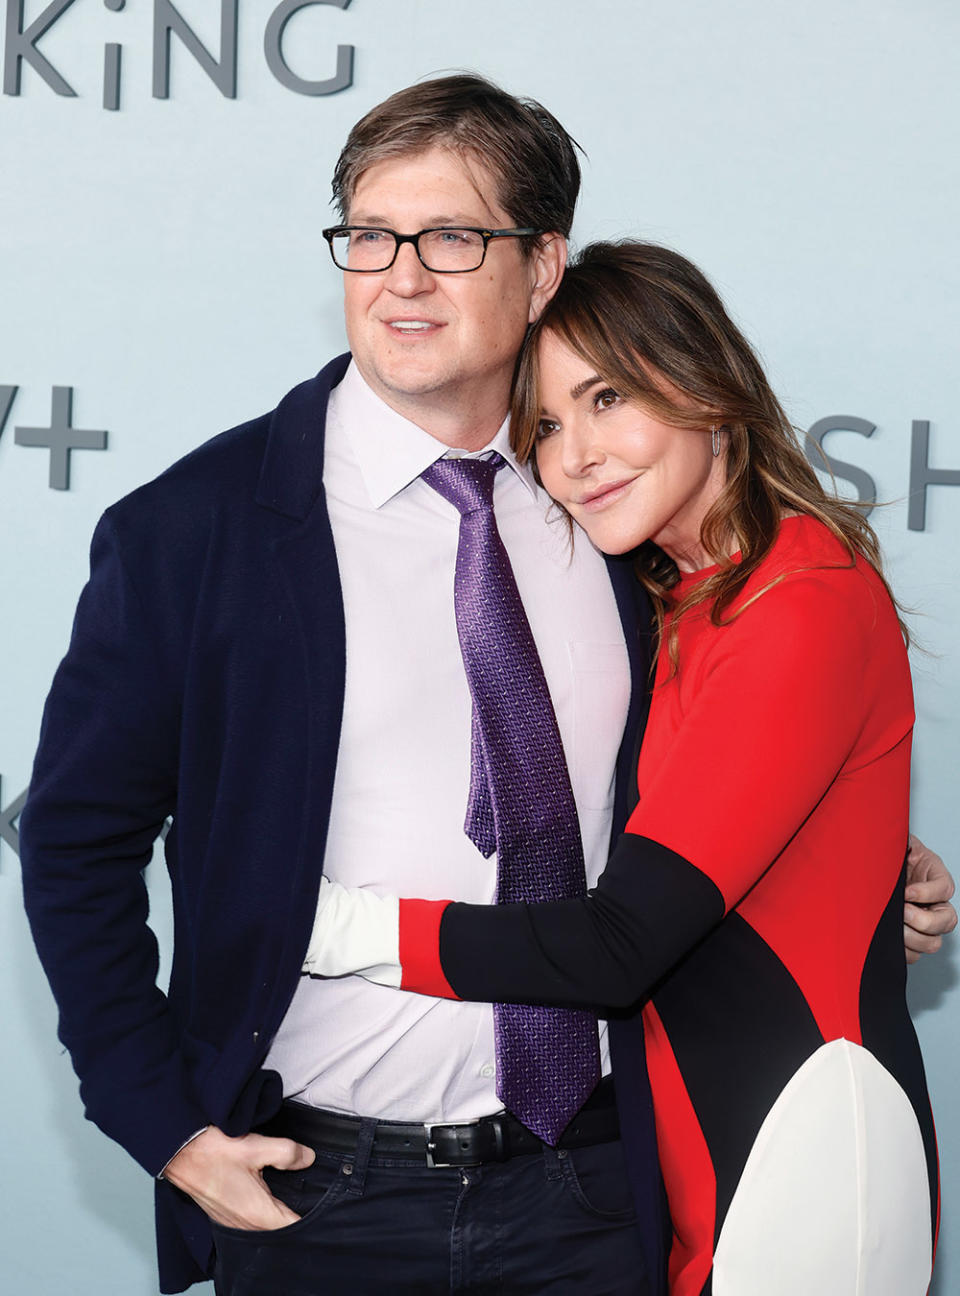 Lawrence with his frequent collaborator and wife of 23 years, Christa Miller.